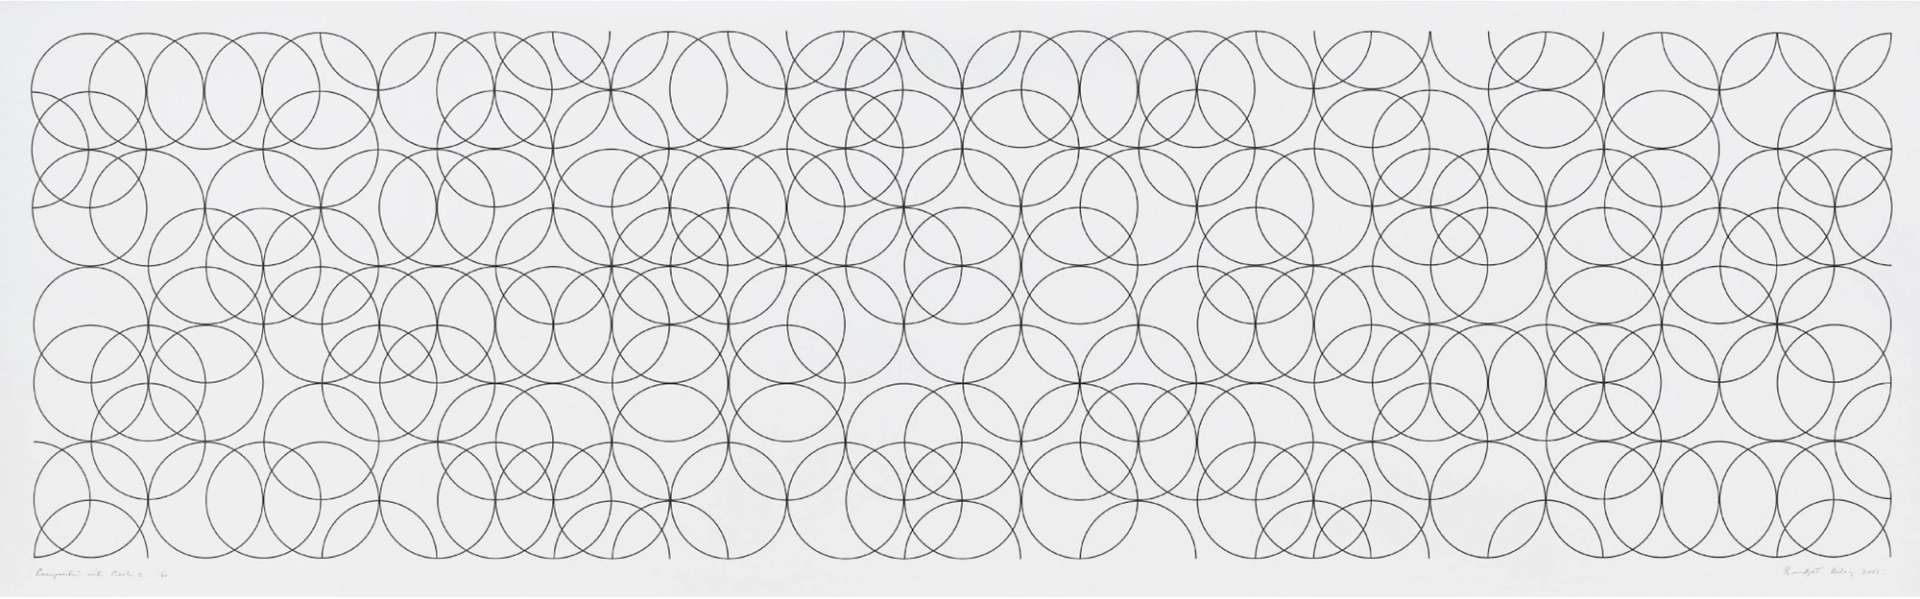 Composition With Circles 2 - Signed Print by Bridget Riley 2001 - MyArtBroker